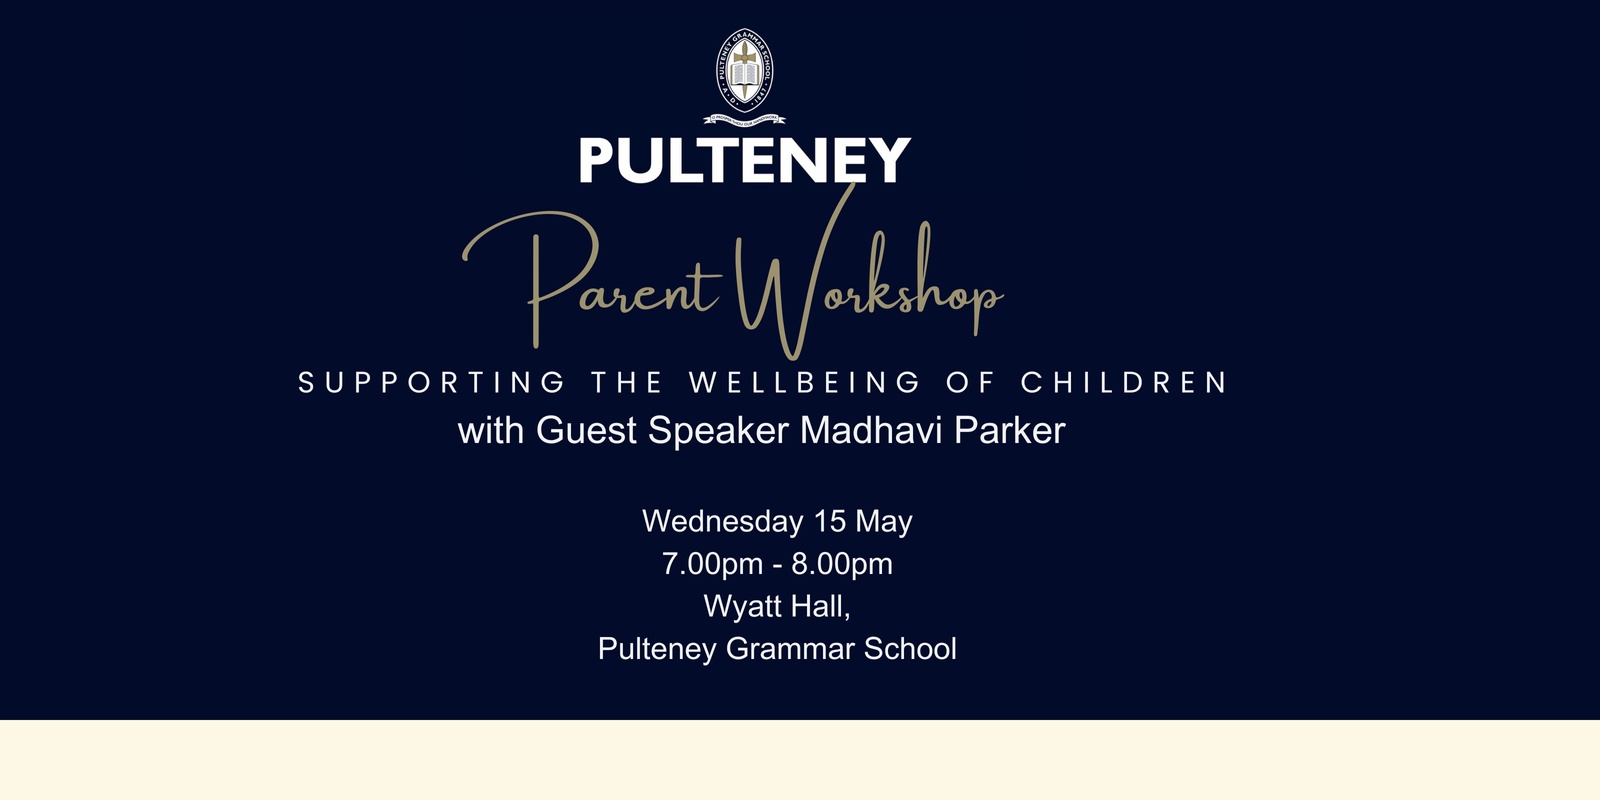 Banner image for Pulteney Parent Workshop: Supporting the Wellbeing of Children with Madhavi Parker